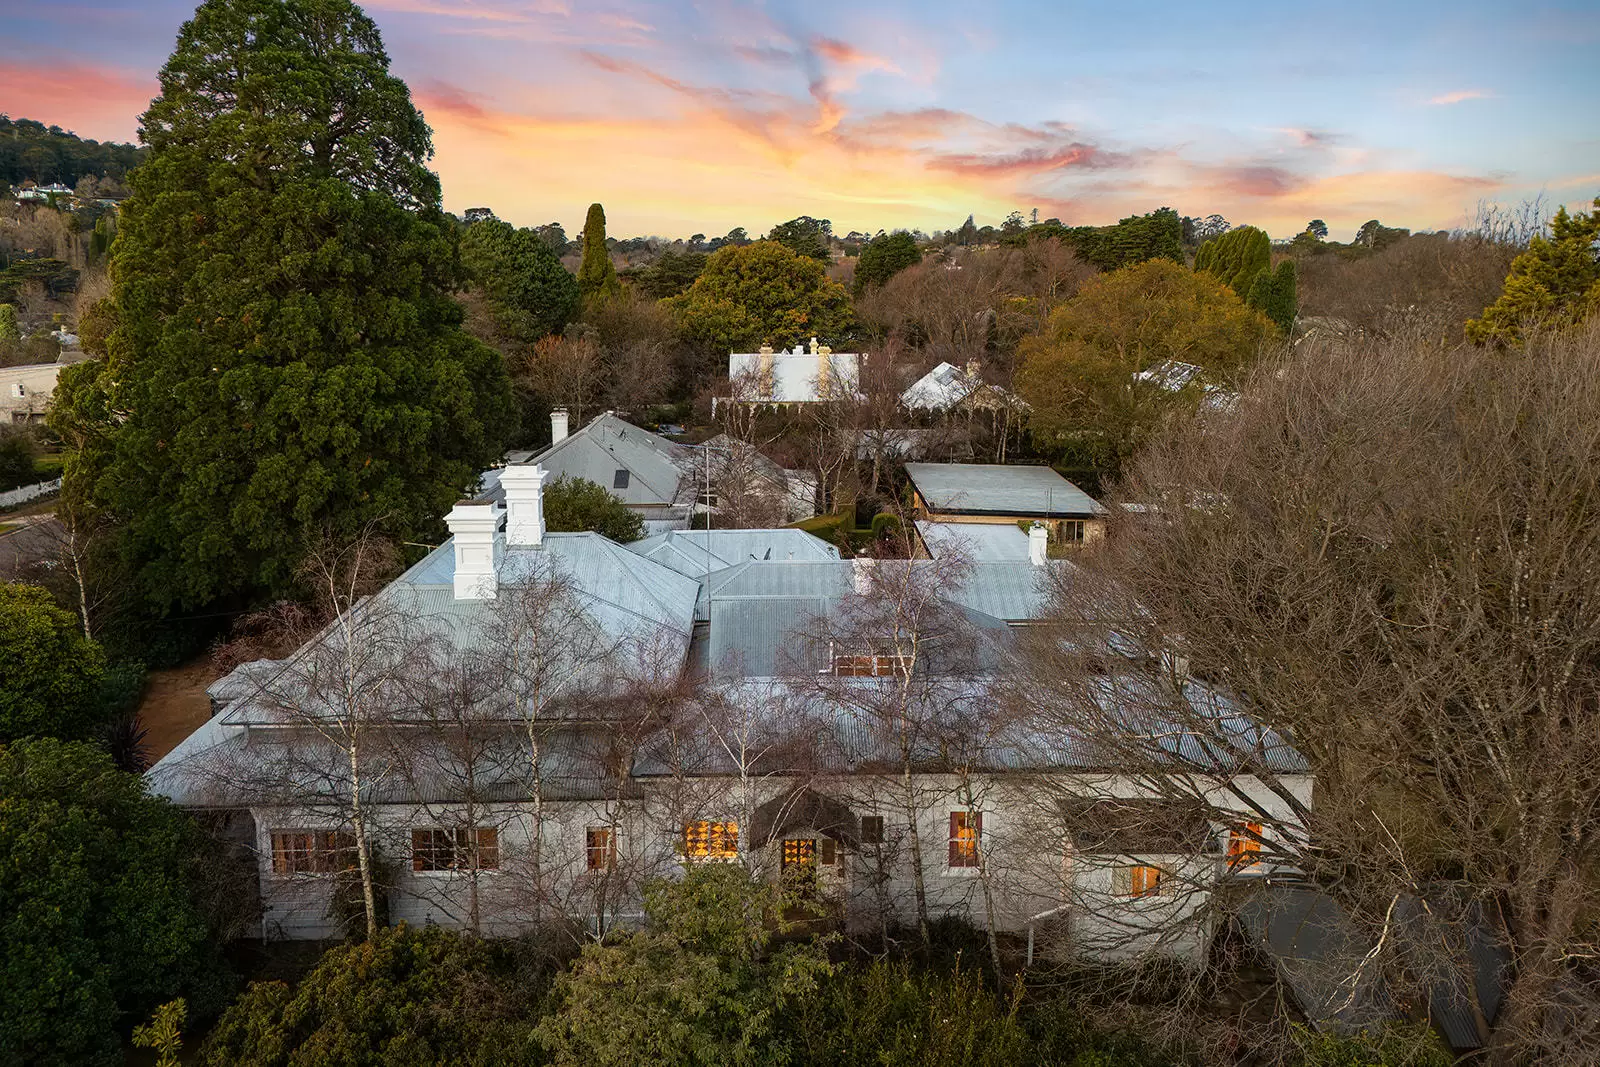 29-31 Merrigang Street, Bowral For Sale by Drew Lindsay Sotheby's International Realty - image 26